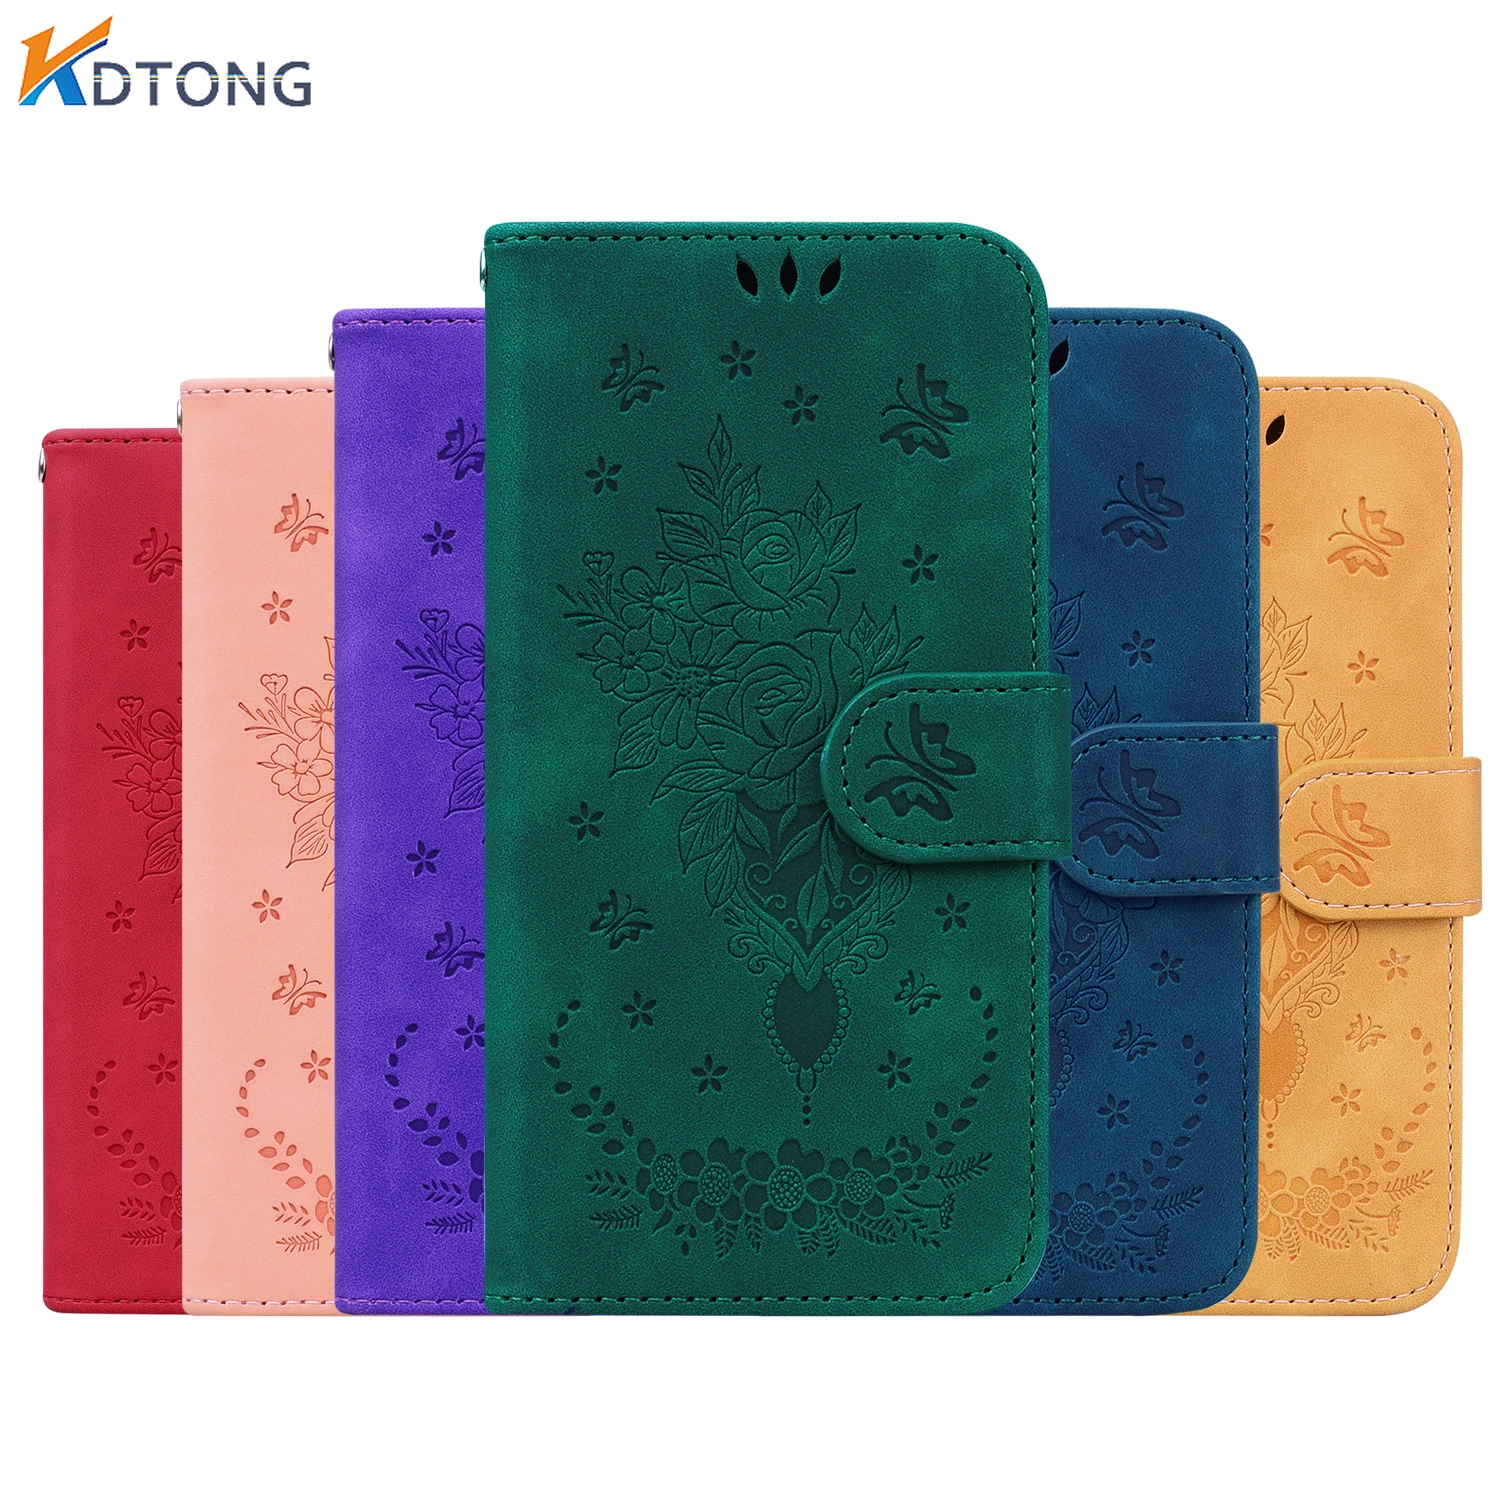 

Embossed Leather Flip Case For Moto G31 G41 G Pure Power E20 E30 E40 G60S G50 Edge 20 Pro S G40 Fusion G30 G10 G20 Wallet Cover